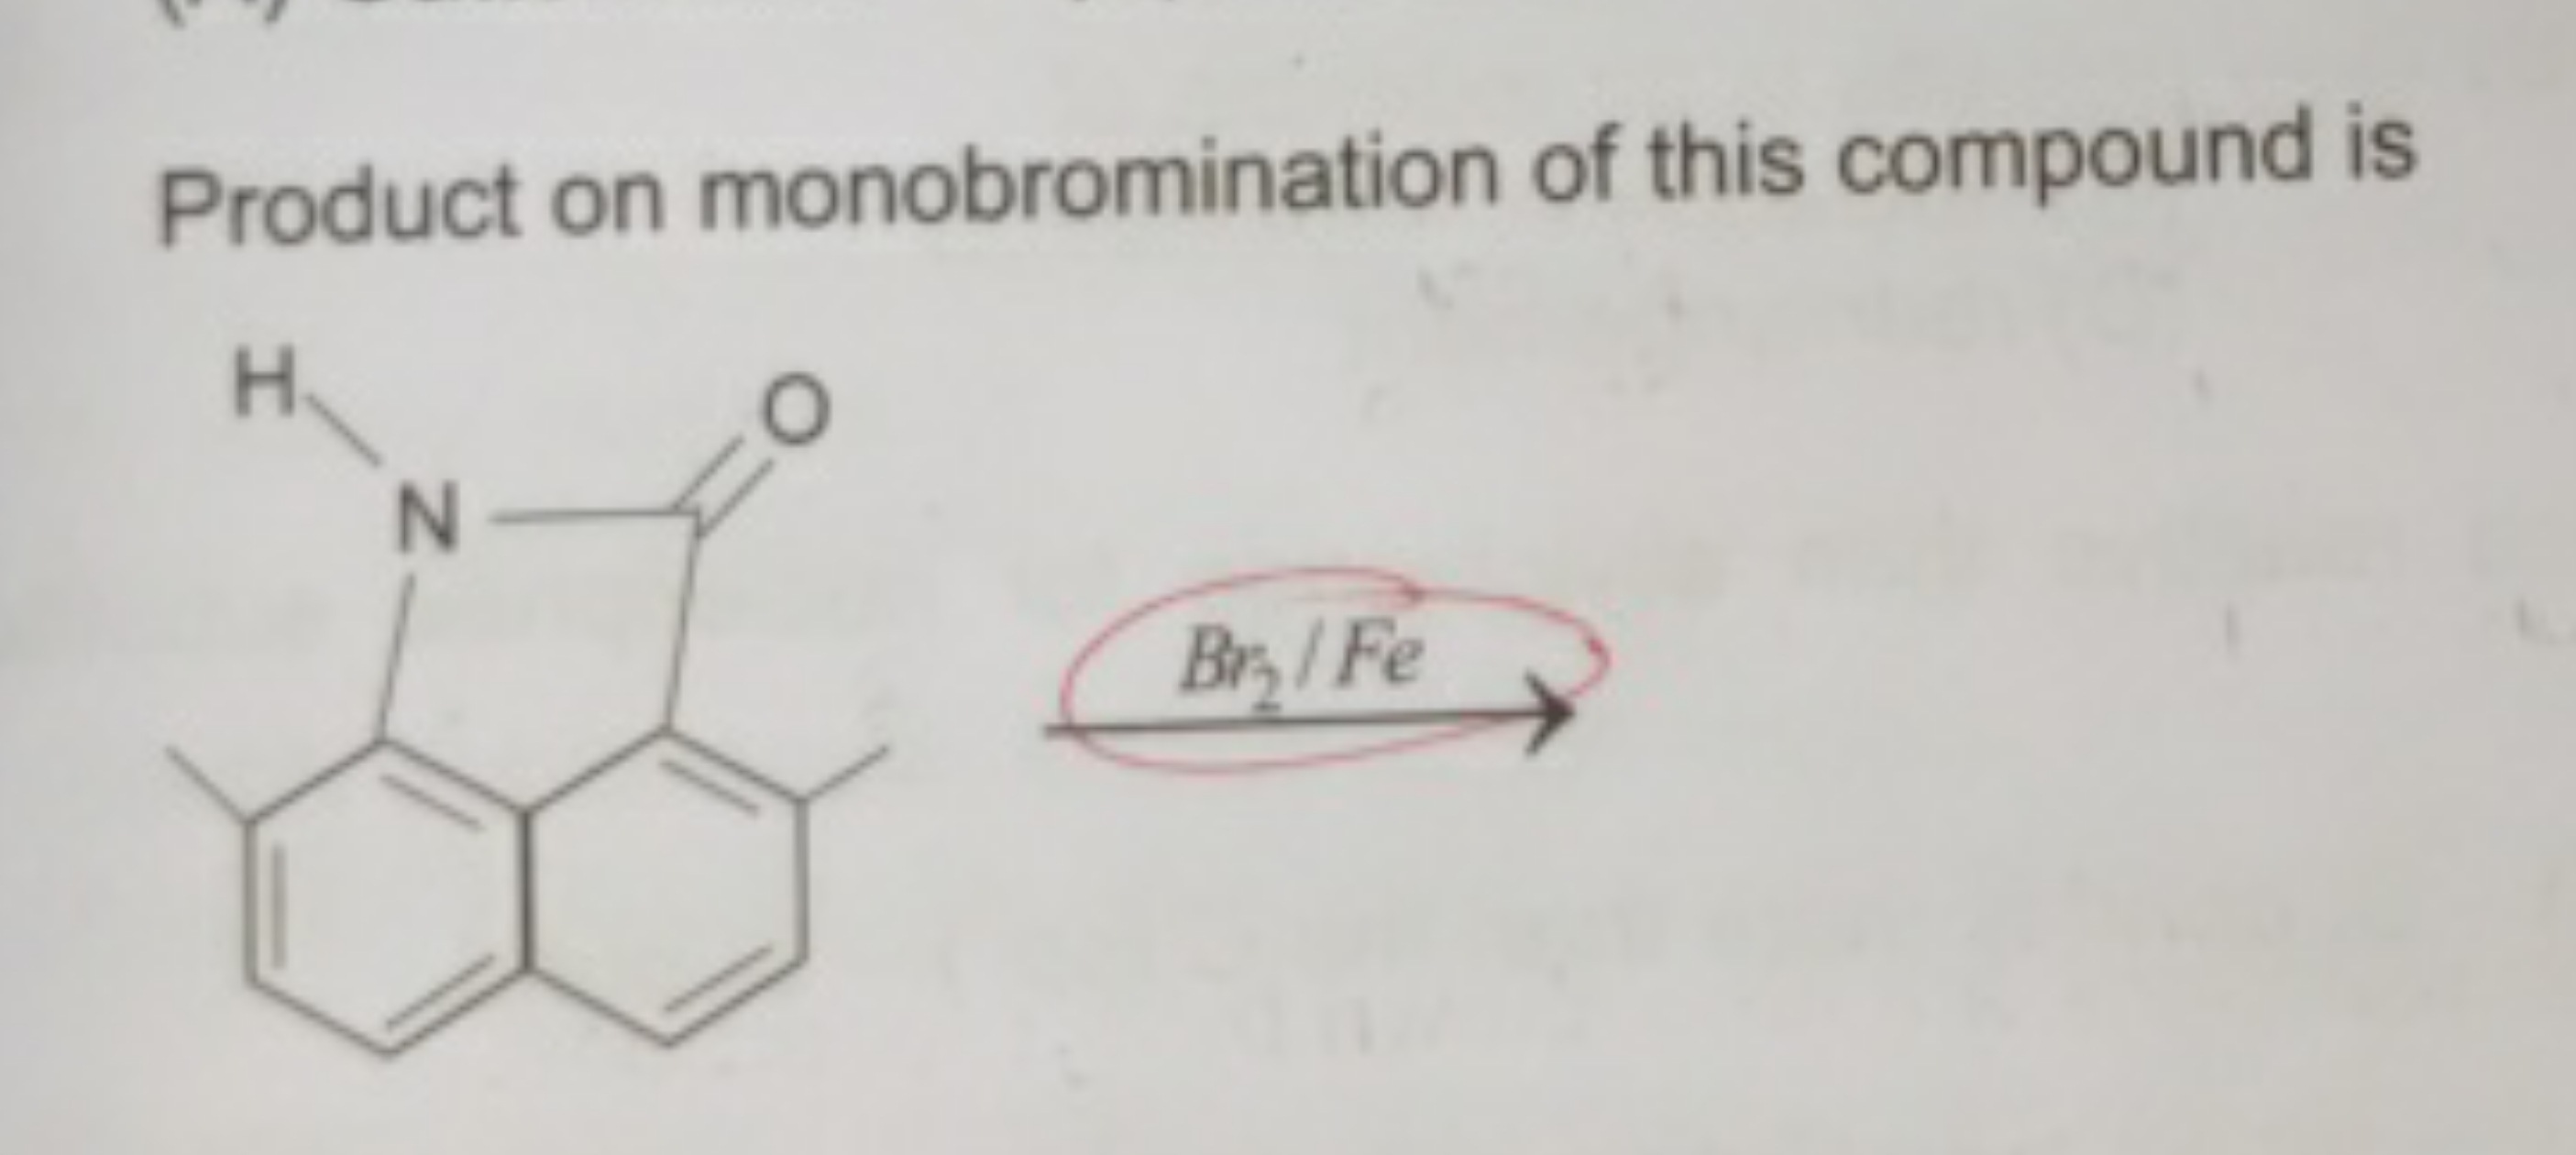 Product on monobromination of this compound is
Cc1ccc2ccc(C)c3c2c1NC3=